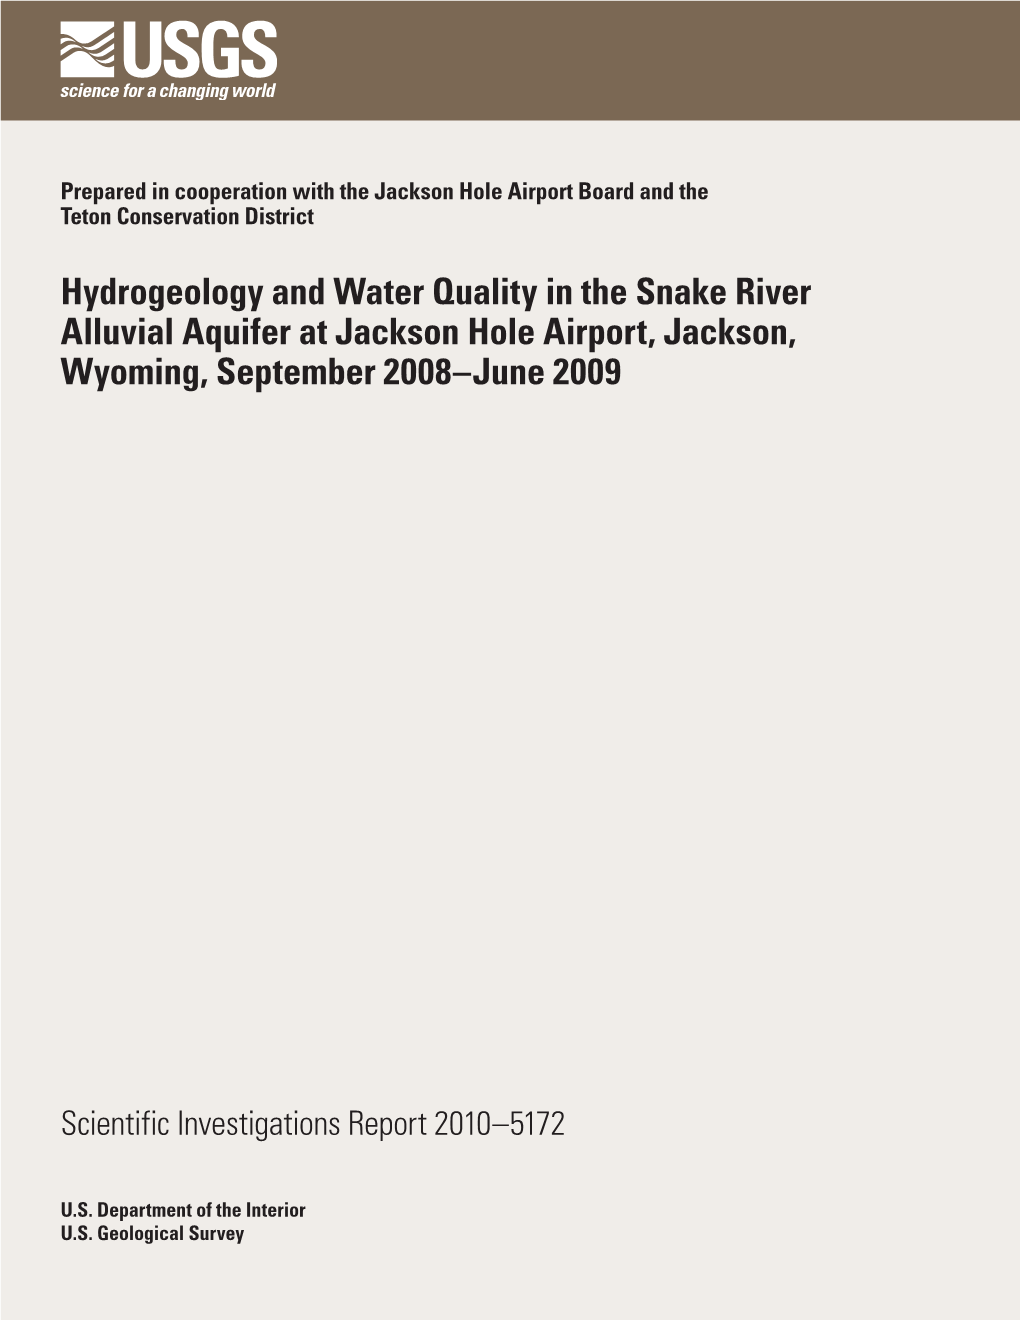 Hydrogeology and Water Quality in the Snake River Alluvial Aquifer at Jackson Hole Airport, Jackson, Wyoming, September 2008–June 2009